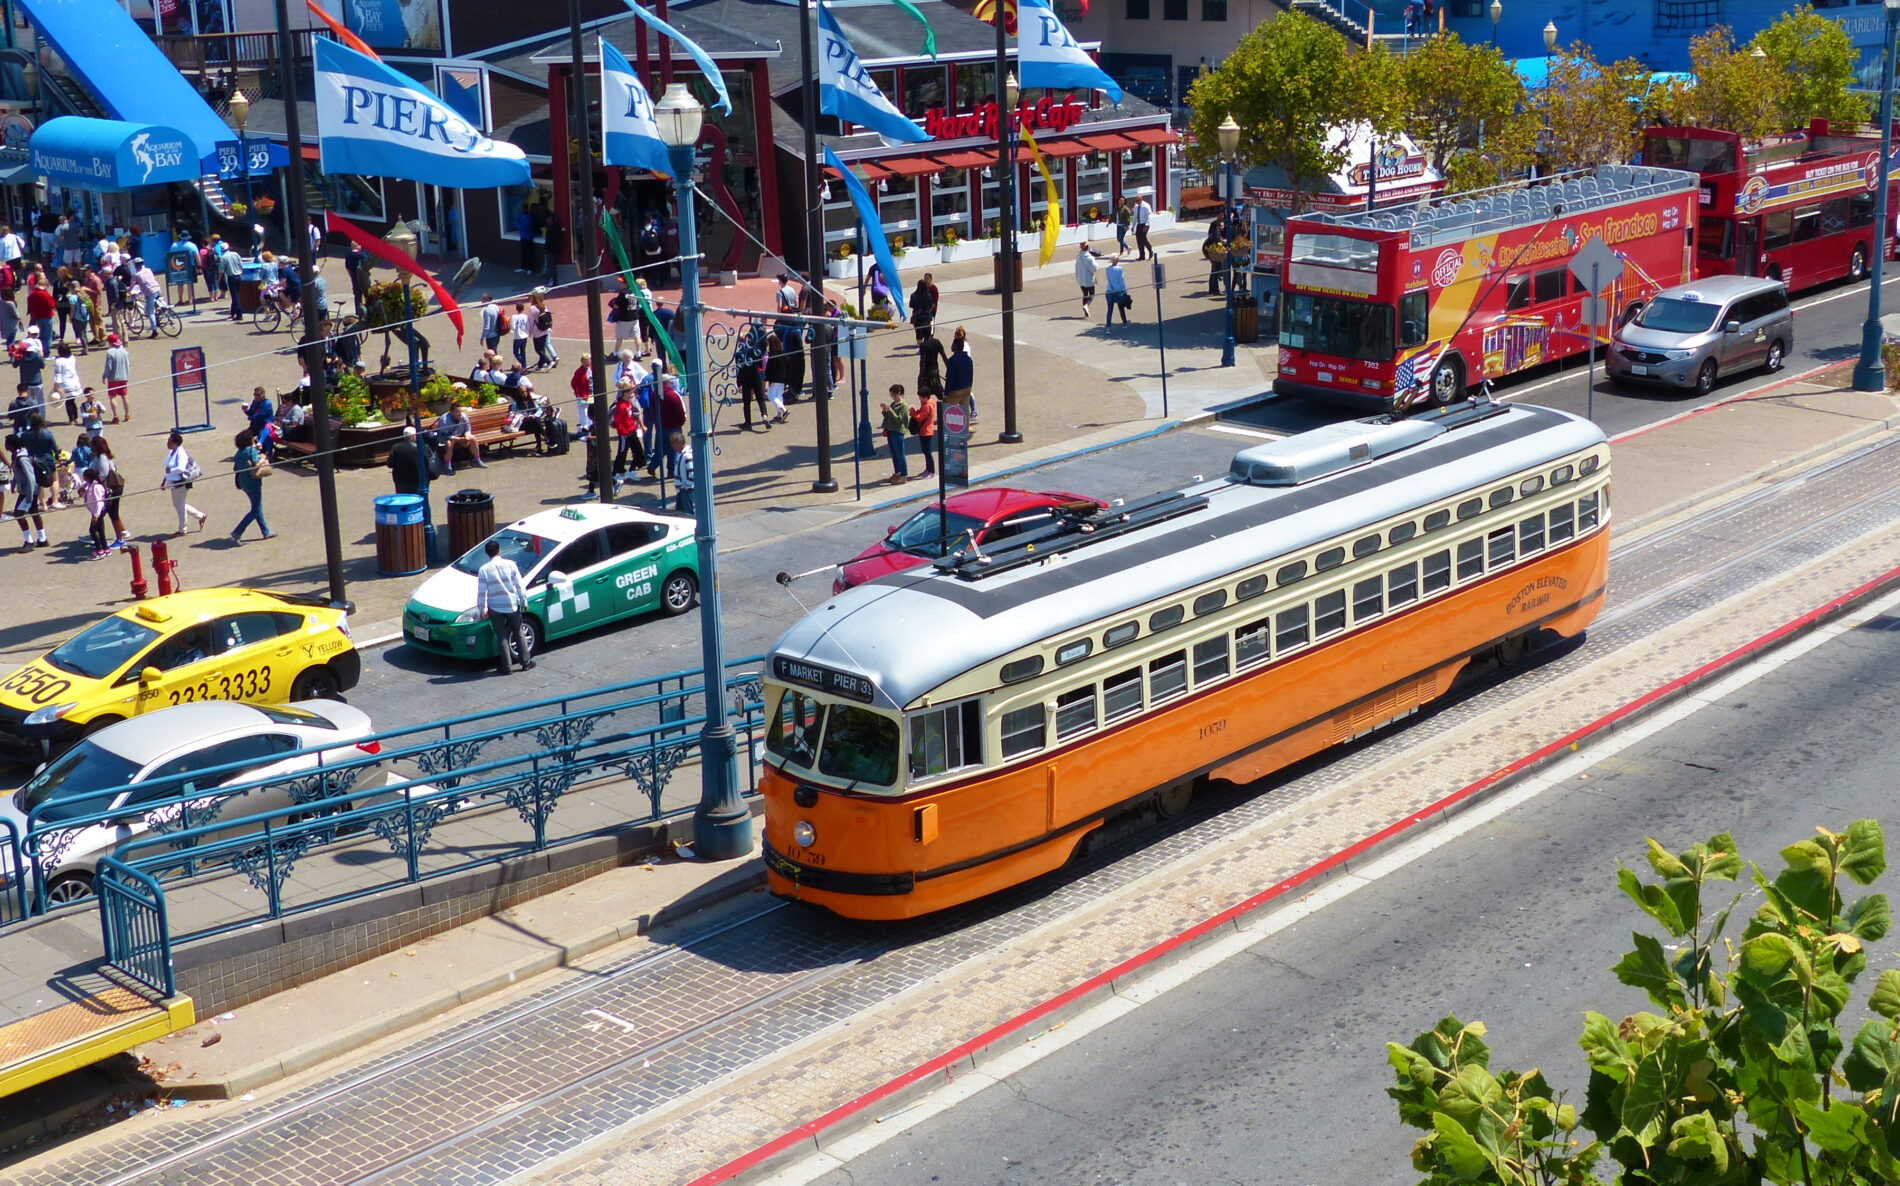 Riding a historic streetcar along the Embarcadero to Pier 39 and Fisherman’s Wharf is a must on any San Francisco Itinerary.